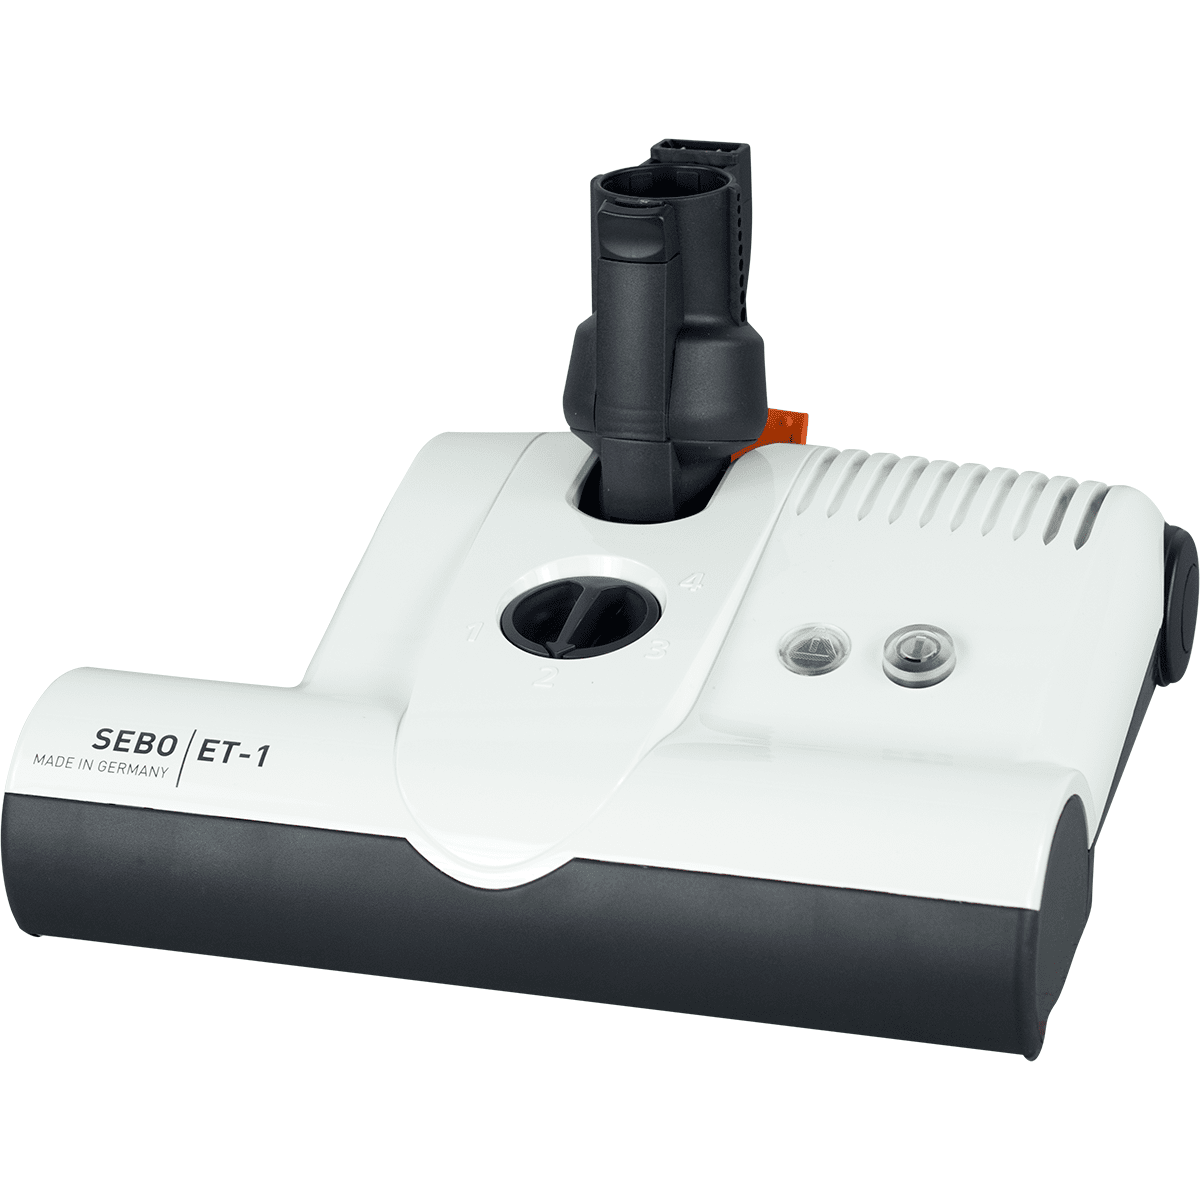 SEBO ET-1 Power Head for K3 and D4 Canister Vacuums